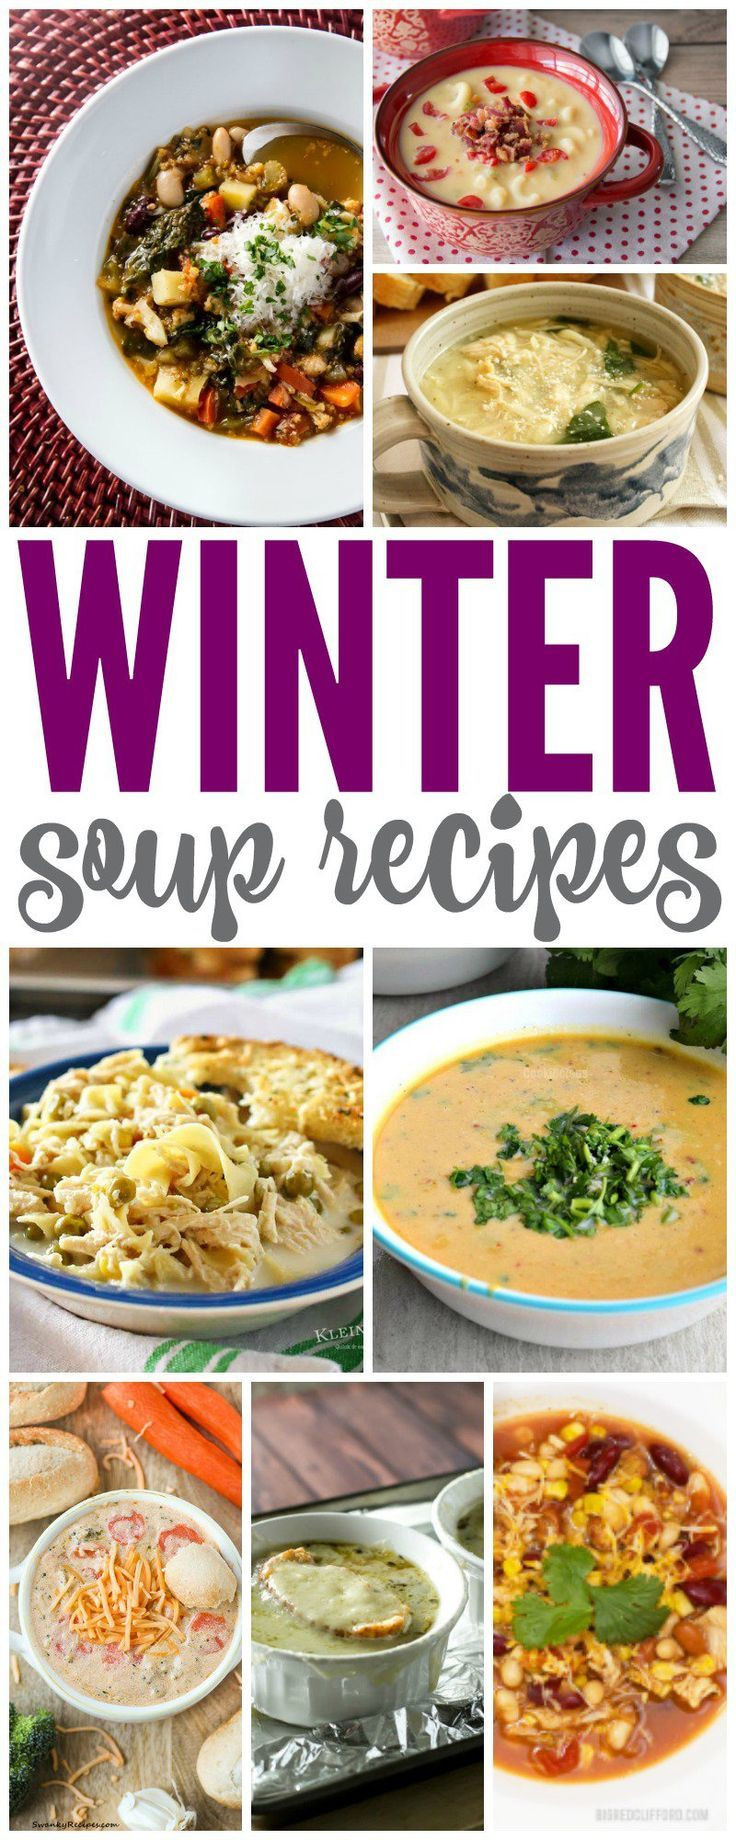 Best Winter Dinners
 Winter Soup Recipes The best winter soup recipes for cold